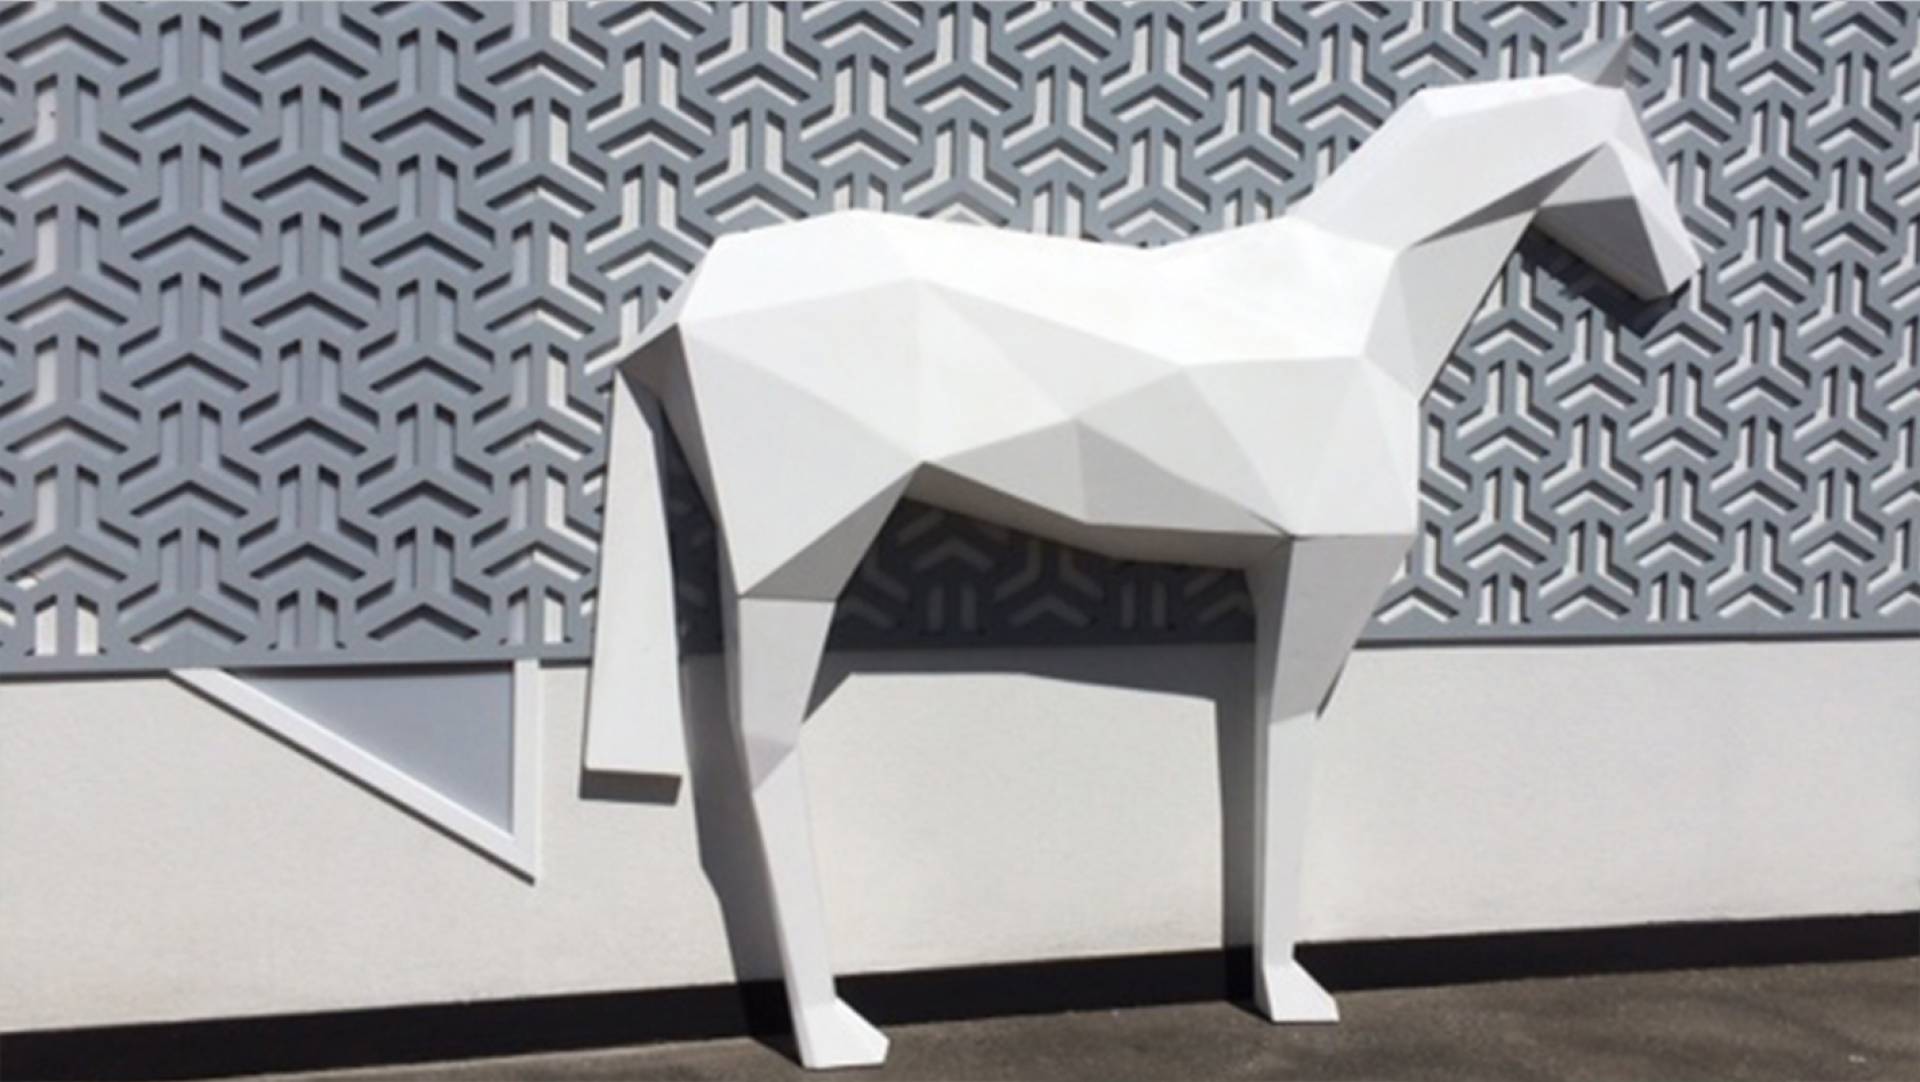 Melbourne Cup Gets a Sculptural magic from Studio Equator and the Super talented Hector